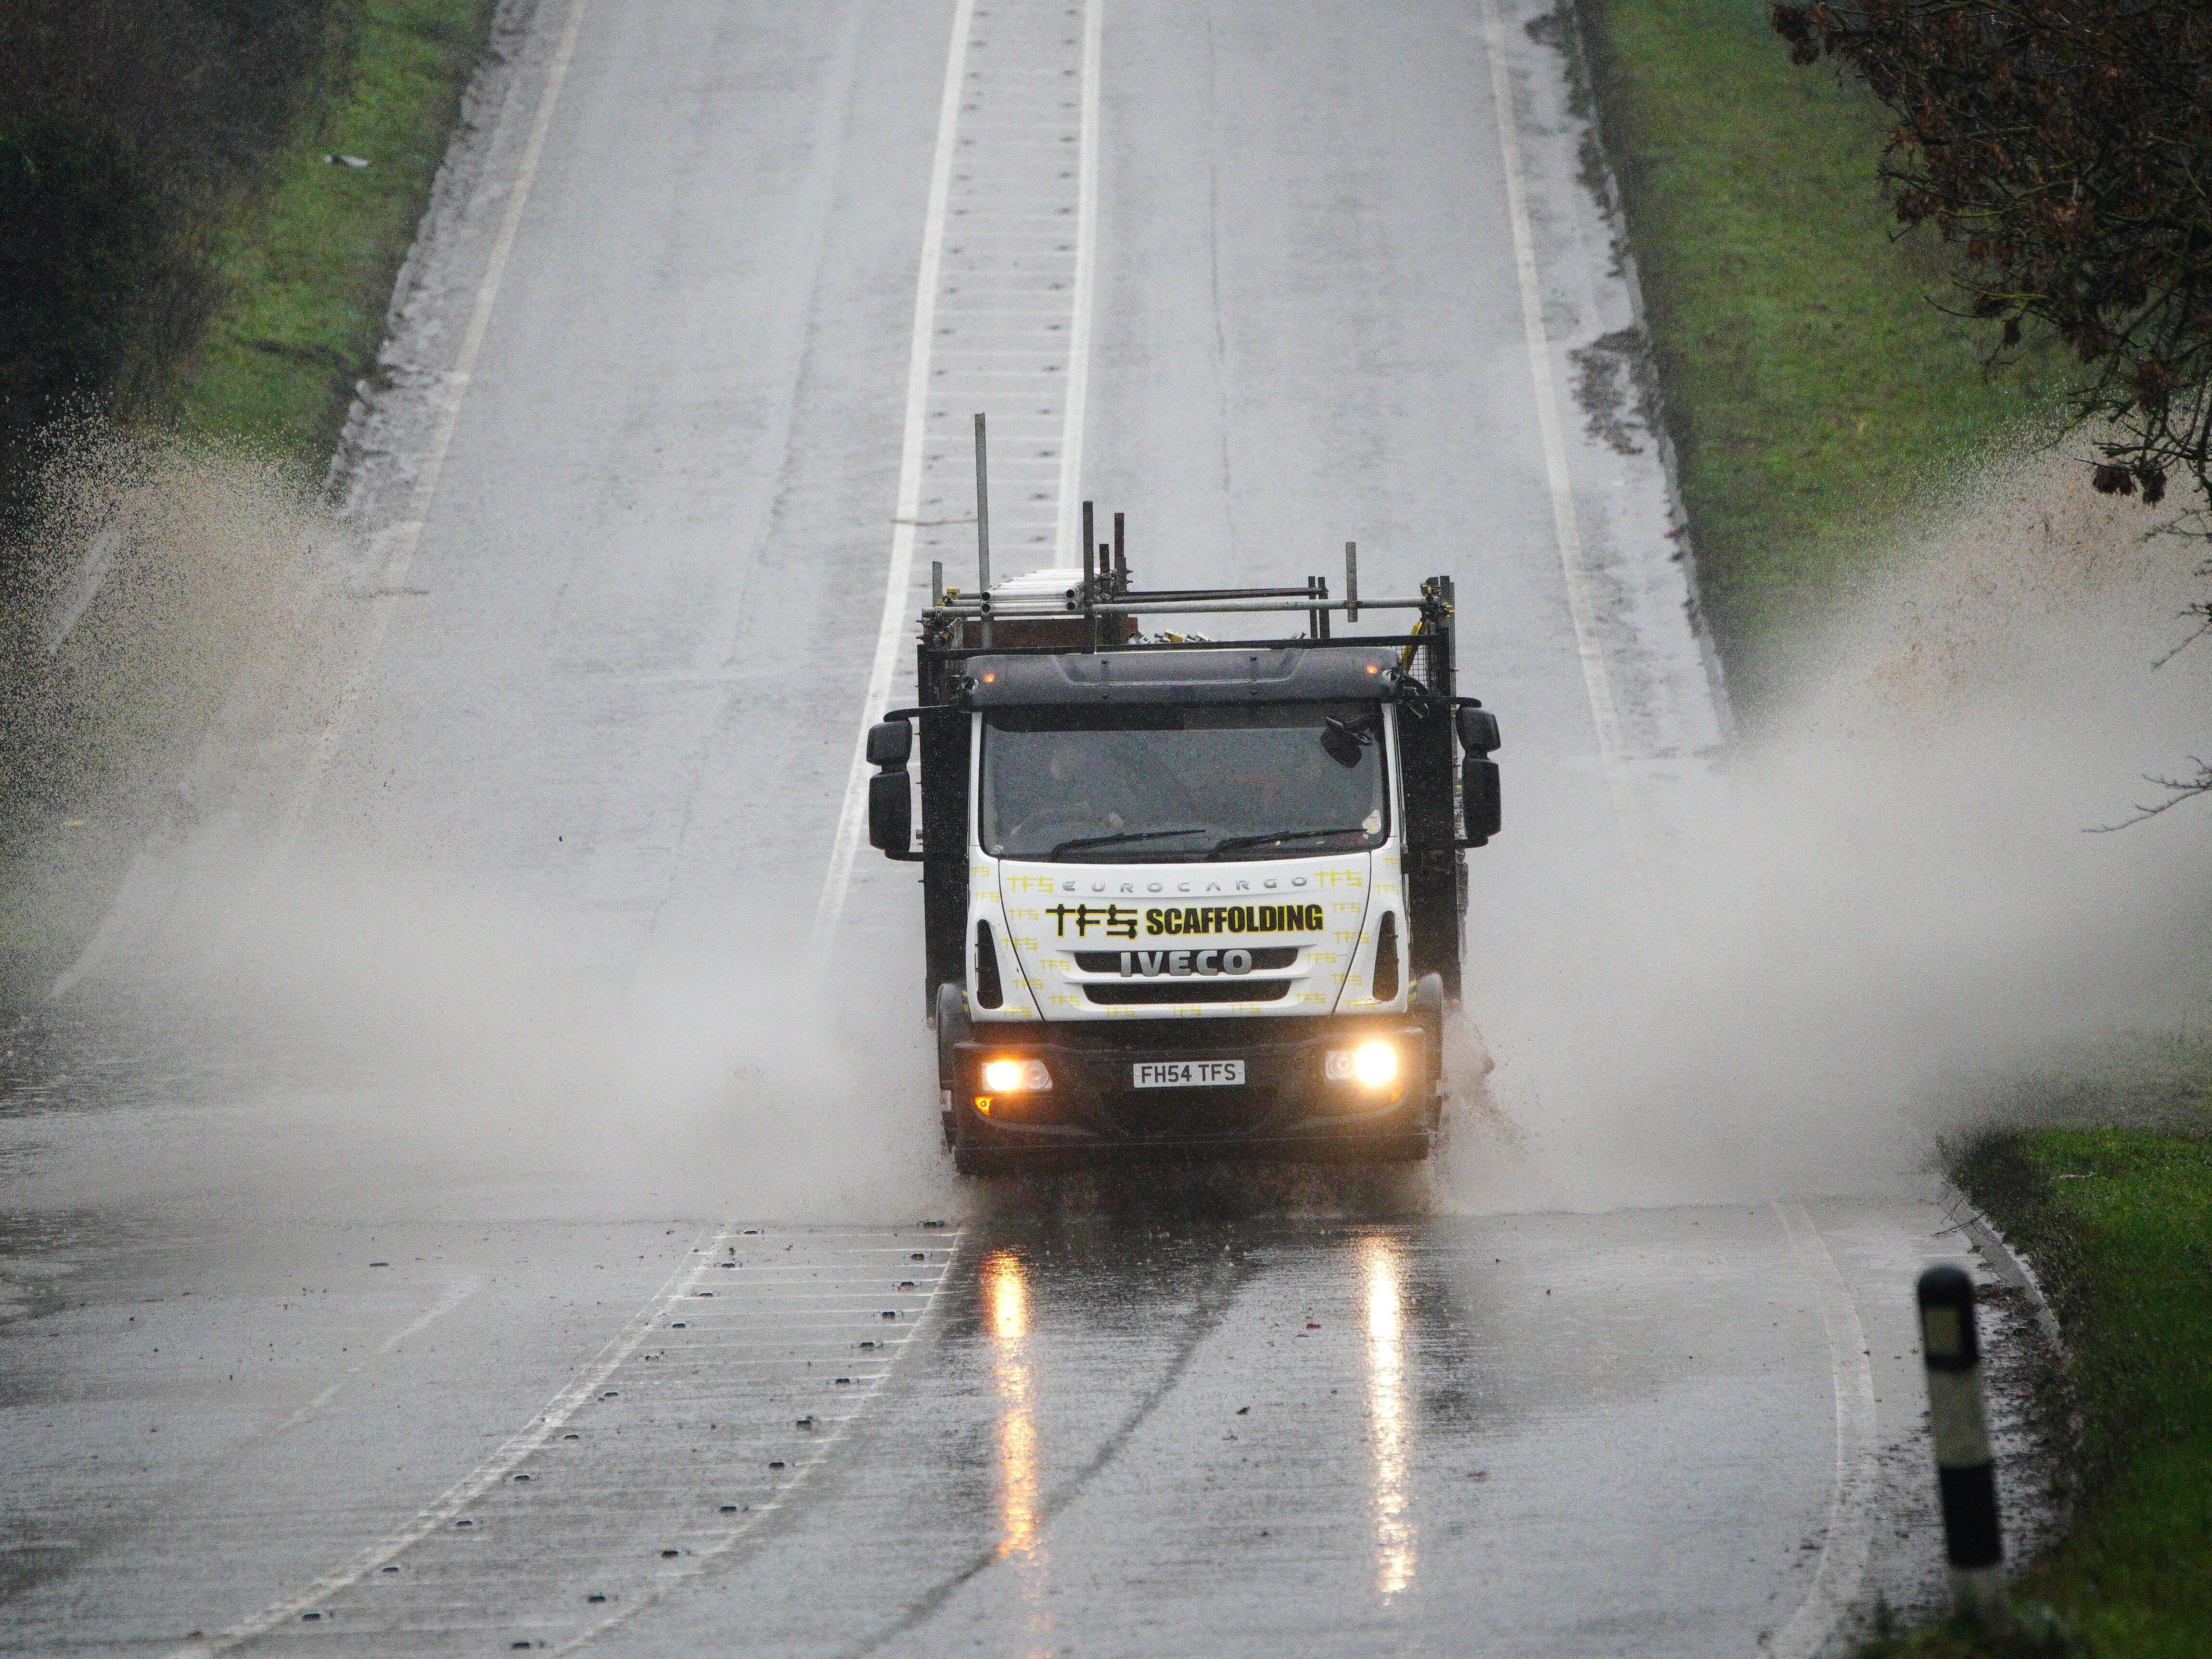 Nearly 30 flood warnings issued as UK faces heavy rain but snow risk lessens